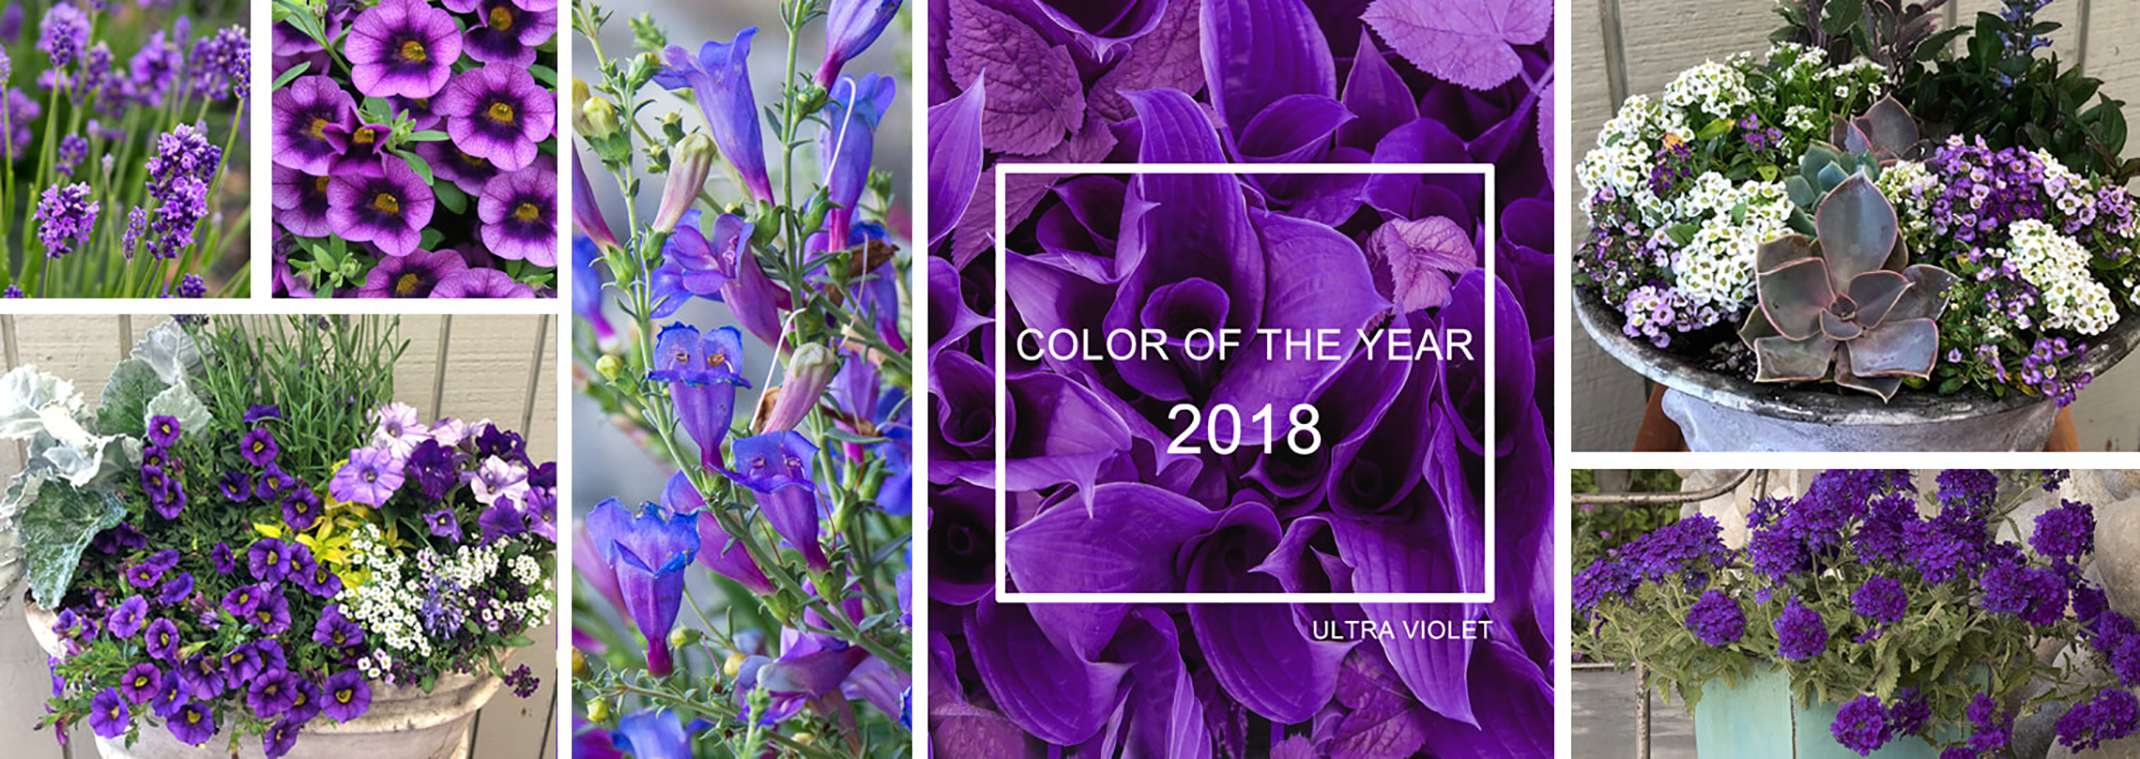 Assorted purple and violet plants and displays of puple and complimentary plants in containers for 2018's color of the year, ultra violet